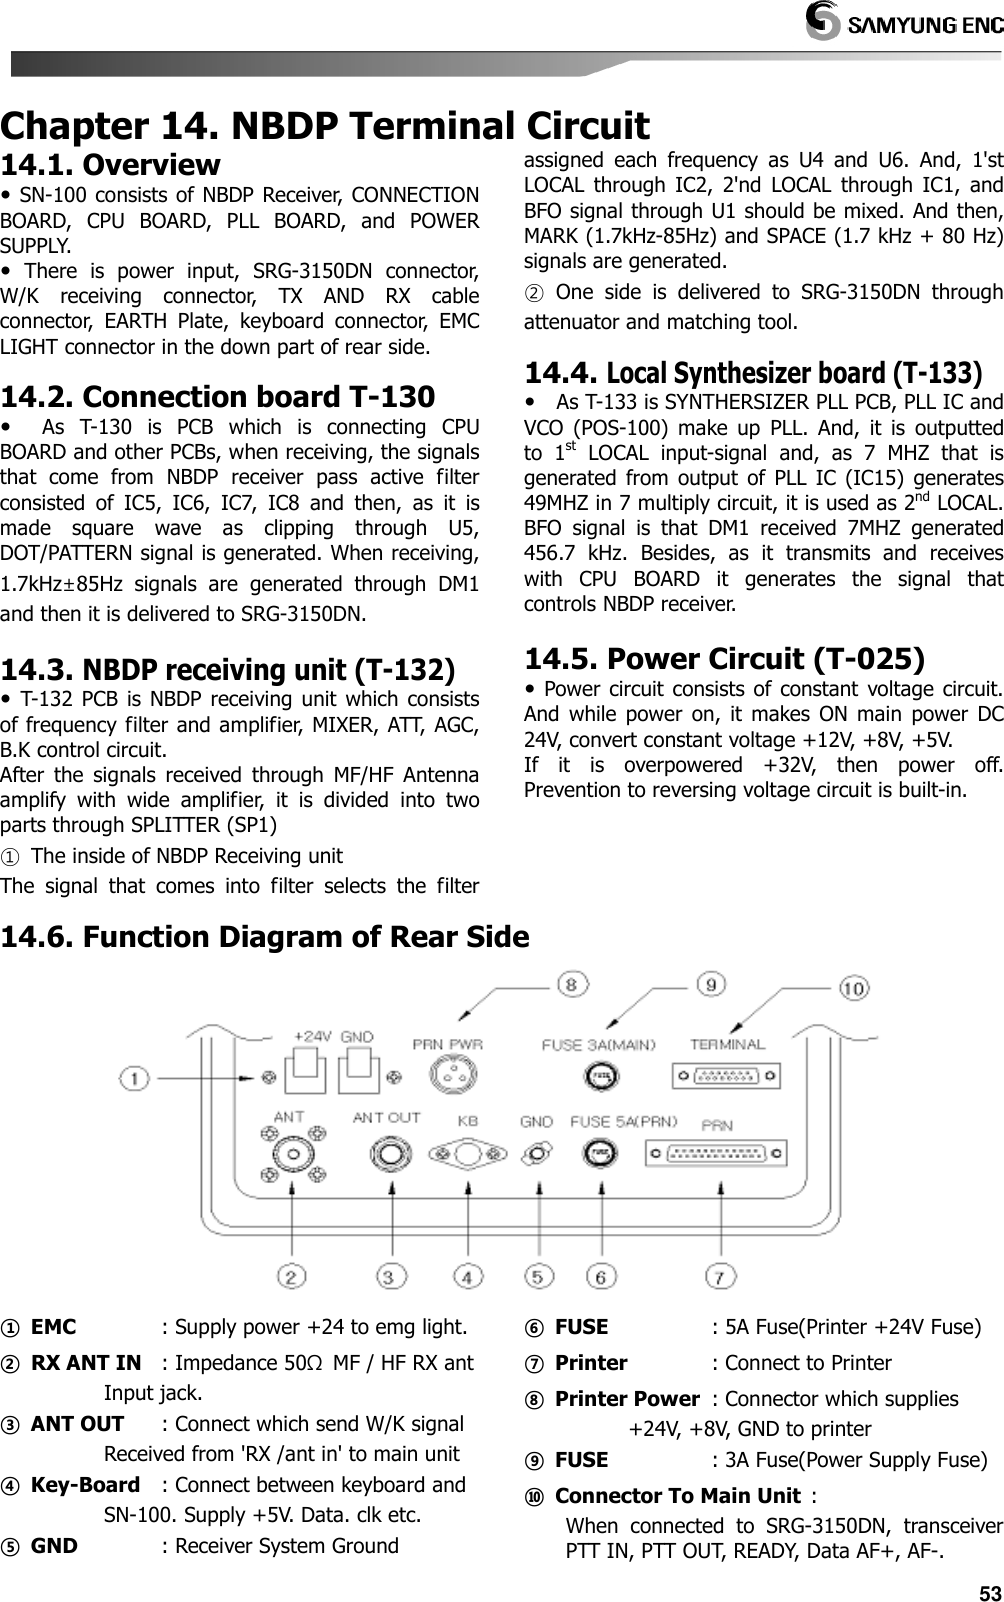   53 Chapter 14. NBDP Terminal Circuit 14.1. Overview  SN-100 consists of NBDP Receiver, CONNECTION BOARD,  CPU  BOARD,  PLL  BOARD,  and  POWER SUPPLY.   There  is  power  input,  SRG-3150DN  connector, W/K  receiving  connector,  TX  AND  RX  cable connector,  EARTH  Plate,  keyboard  connector,  EMC LIGHT connector in the down part of rear side.  14.2. Connection board T-130     As  T-130  is  PCB  which  is  connecting  CPU BOARD and other PCBs, when receiving, the signals that  come  from  NBDP  receiver  pass  active  filter consisted  of  IC5,  IC6,  IC7,  IC8  and  then,  as  it  is made  square  wave  as  clipping  through  U5, DOT/PATTERN signal is generated. When receiving, 1.7kHz±85Hz  signals  are  generated  through  DM1 and then it is delivered to SRG-3150DN.      14.3. NBDP receiving unit (T-132)   T-132  PCB  is NBDP  receiving  unit  which  consists of frequency filter and amplifier, MIXER, ATT, AGC, B.K control circuit. After  the  signals  received  through  MF/HF  Antenna amplify  with  wide  amplifier,  it  is  divided  into  two parts through SPLITTER (SP1) ①  The inside of NBDP Receiving unit   The  signal  that  comes  into  filter  selects  the  filter assigned  each  frequency  as  U4  and  U6.  And,  1&apos;st LOCAL  through  IC2,  2&apos;nd  LOCAL  through  IC1,  and BFO signal through U1 should be mixed. And then, MARK (1.7kHz-85Hz) and SPACE (1.7 kHz + 80 Hz) signals are generated.   ②  One  side  is  delivered  to  SRG-3150DN  through attenuator and matching tool.    14.4. Local Synthesizer board (T-133)     As T-133 is SYNTHERSIZER PLL PCB, PLL IC and VCO  (POS-100)  make  up  PLL.  And,  it  is  outputted to  1st  LOCAL  input-signal  and,  as  7  MHZ  that  is generated  from  output  of  PLL IC  (IC15)  generates 49MHZ in 7 multiply circuit, it is used as 2nd LOCAL. BFO  signal  is  that  DM1  received  7MHZ  generated 456.7  kHz.  Besides,  as  it  transmits  and  receives with  CPU  BOARD  it  generates  the  signal  that controls NBDP receiver.  14.5. Power Circuit (T-025)  Power circuit consists of constant  voltage  circuit. And  while  power  on,  it  makes  ON  main  power  DC 24V, convert constant voltage +12V, +8V, +5V. If  it  is  overpowered  +32V,  then  power  off. Prevention to reversing voltage circuit is built-in.  14.6. Function Diagram of Rear Side ①  EMC                 : Supply power +24 to emg light. ②  RX ANT IN    : Impedance 50Ω  MF / HF RX ant Input jack. ③  ANT OUT        : Connect which send W/K signal   Received from &apos;RX /ant in&apos; to main unit   ④  Key-Board    : Connect between keyboard and   SN-100. Supply +5V. Data. clk etc. ⑤  GND                : Receiver System Ground ⑥  FUSE                    : 5A Fuse(Printer +24V Fuse) ⑦  Printer                 : Connect to Printer ⑧  Printer Power   : Connector which supplies   +24V, +8V, GND to printer ⑨  FUSE                    : 3A Fuse(Power Supply Fuse) ⑩  Connector To Main Unit  : When  connected  to  SRG-3150DN,  transceiver PTT IN, PTT OUT, READY, Data AF+, AF-.